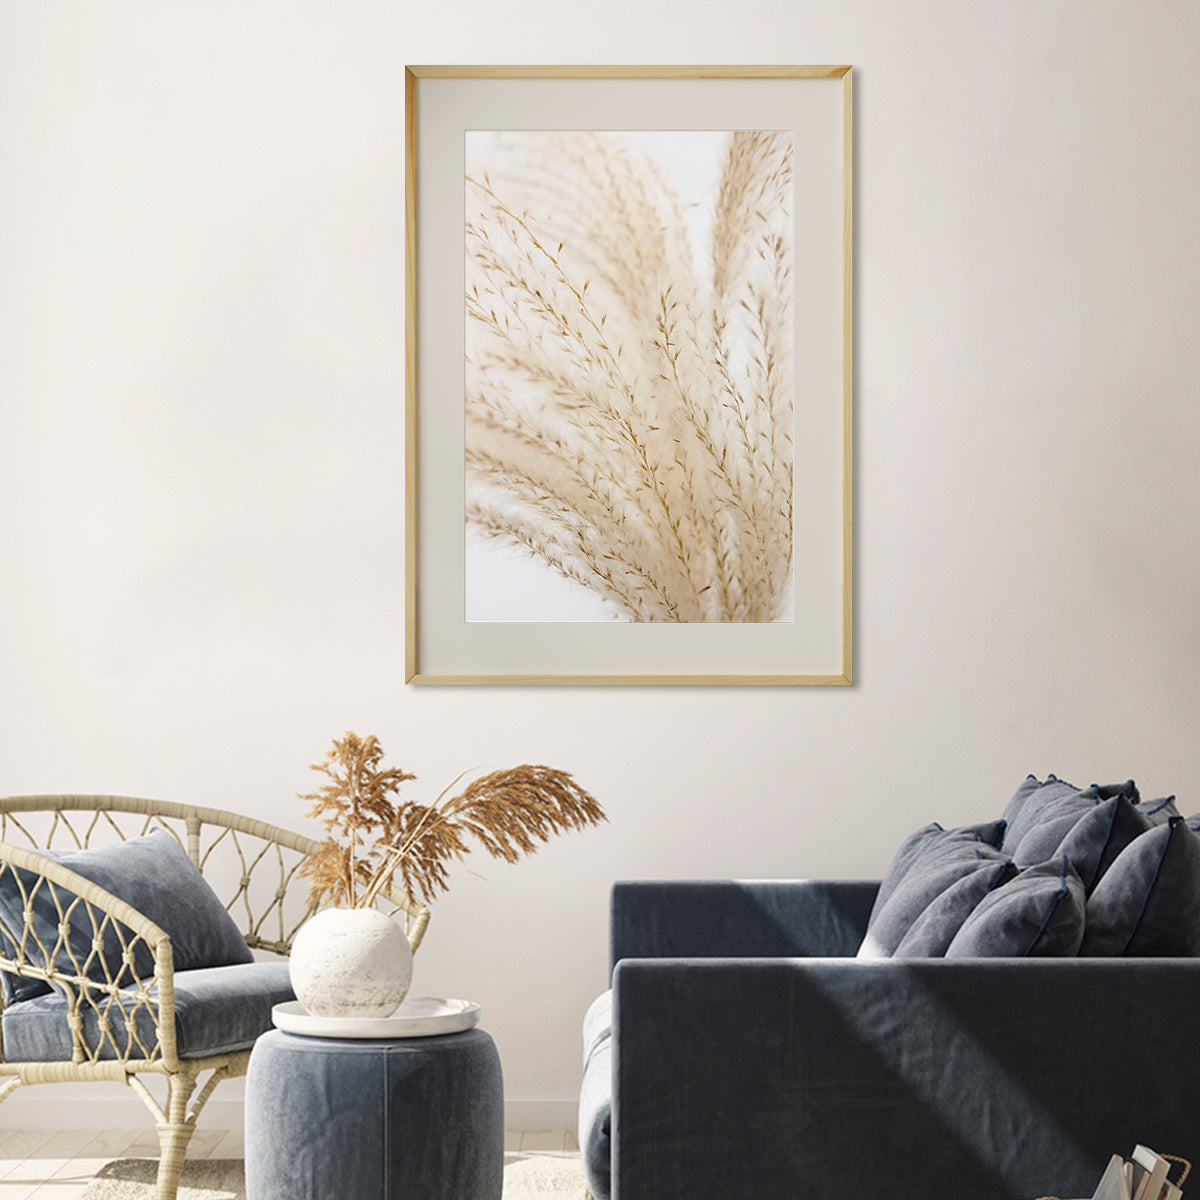 Minimalist Beige Pampas Grass Vintage Posters For Room-Vertical Posters NOT FRAMED-CetArt-8″x10″ inches-CetArt